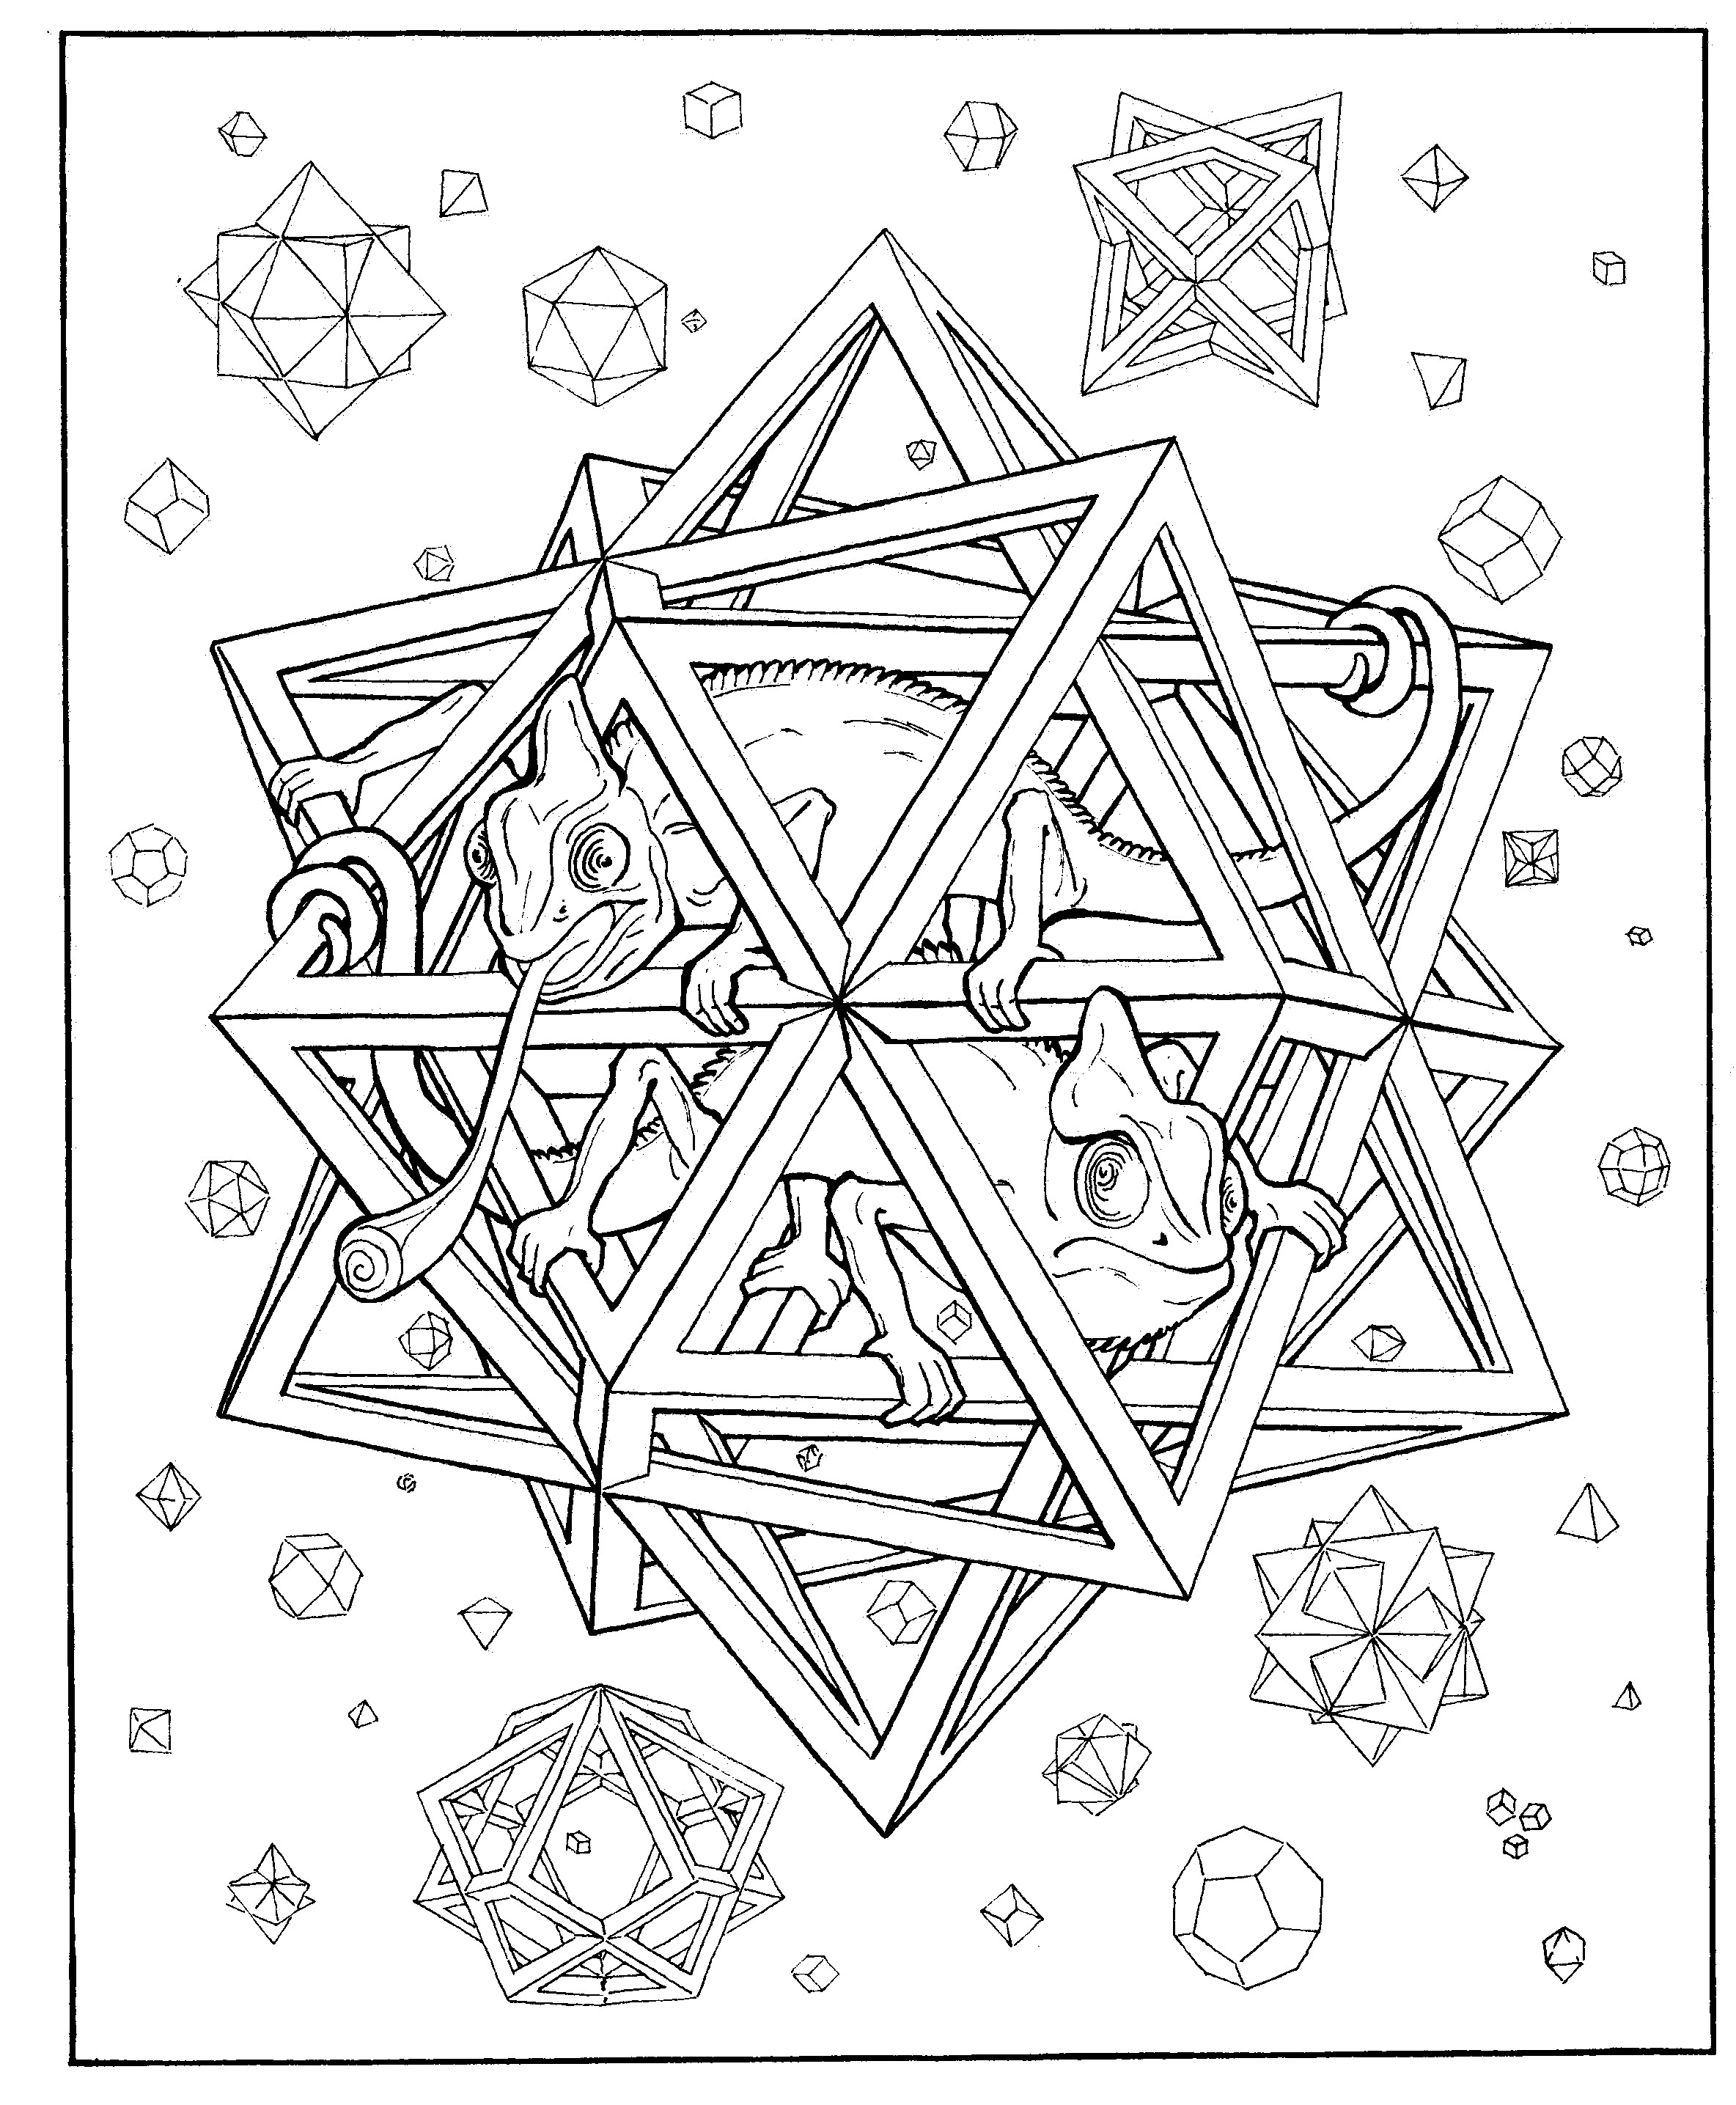 Adult Coloring Book Pages Geometric
 Geometric Coloring Pages For Adults Coloring Home